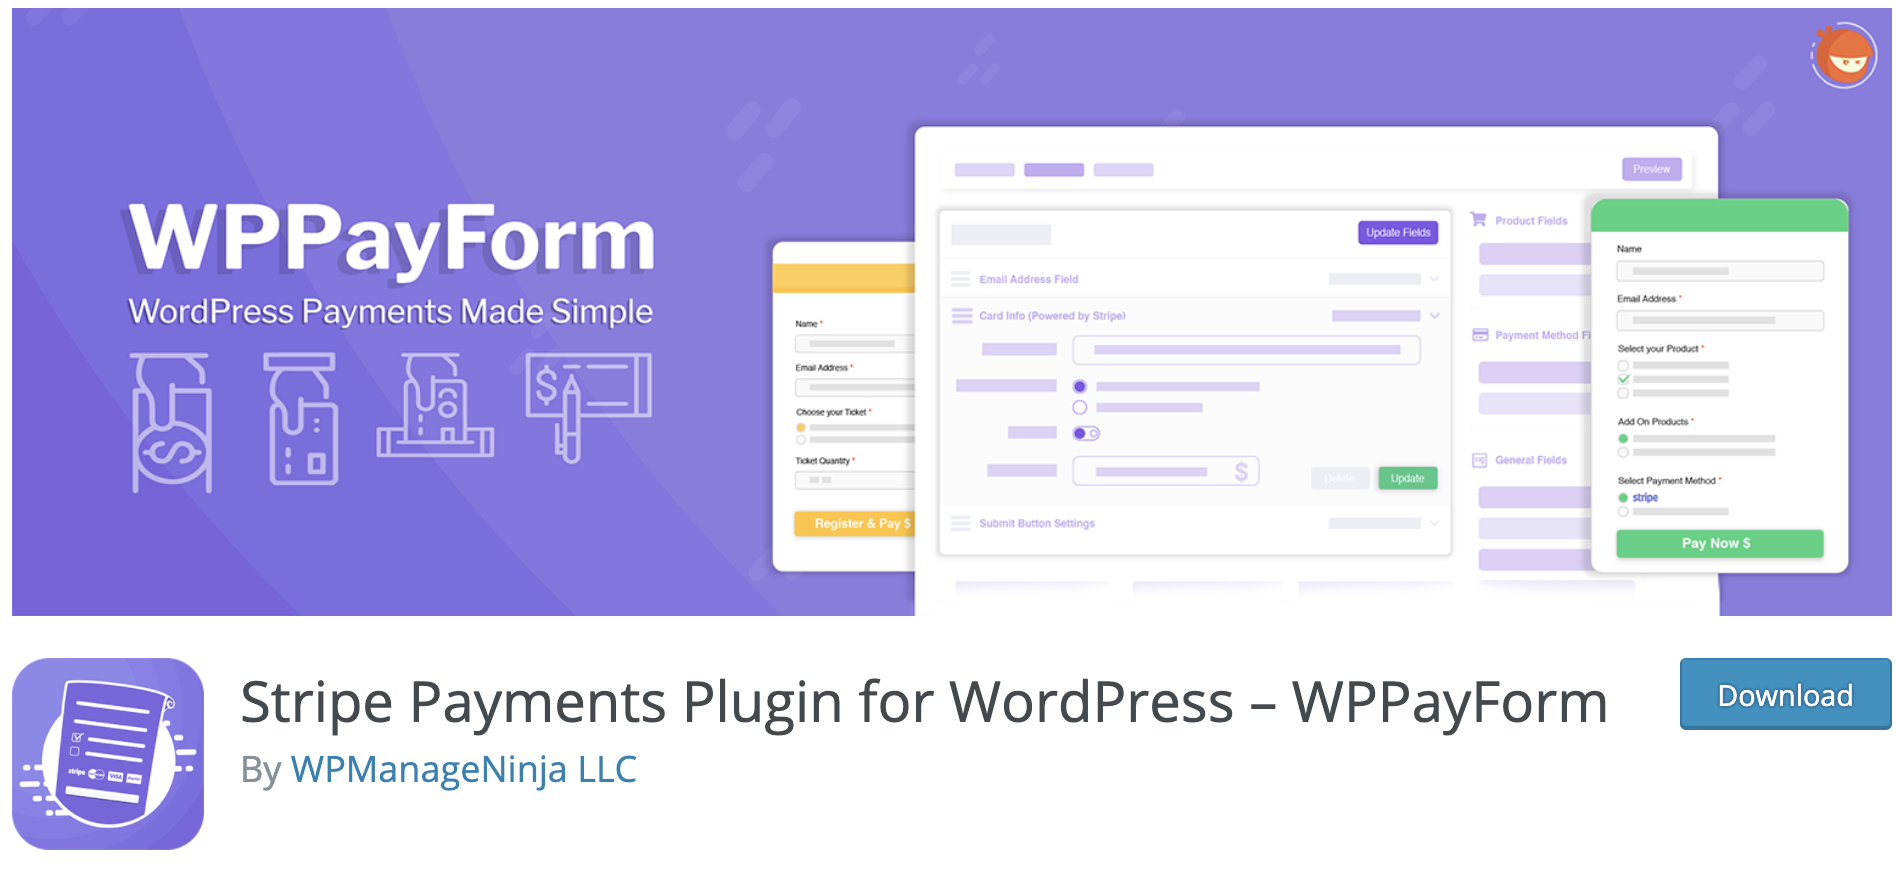 wp pay form payment solution plug in on wordpress